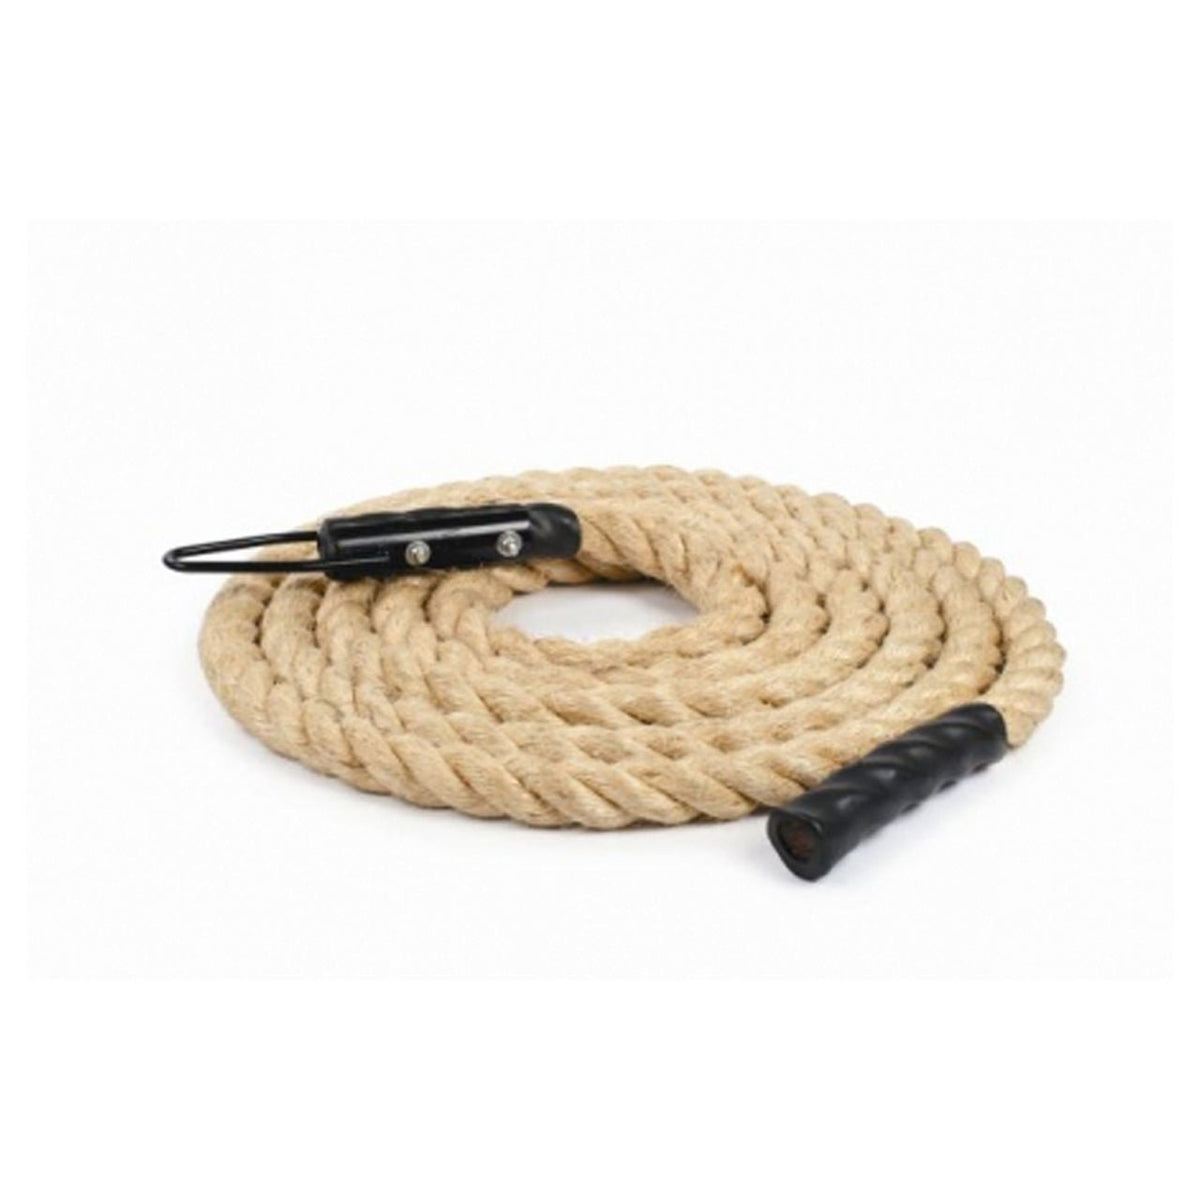 360 Conditioning CoreFX Climbing Rope - 5m - Fitness Experience